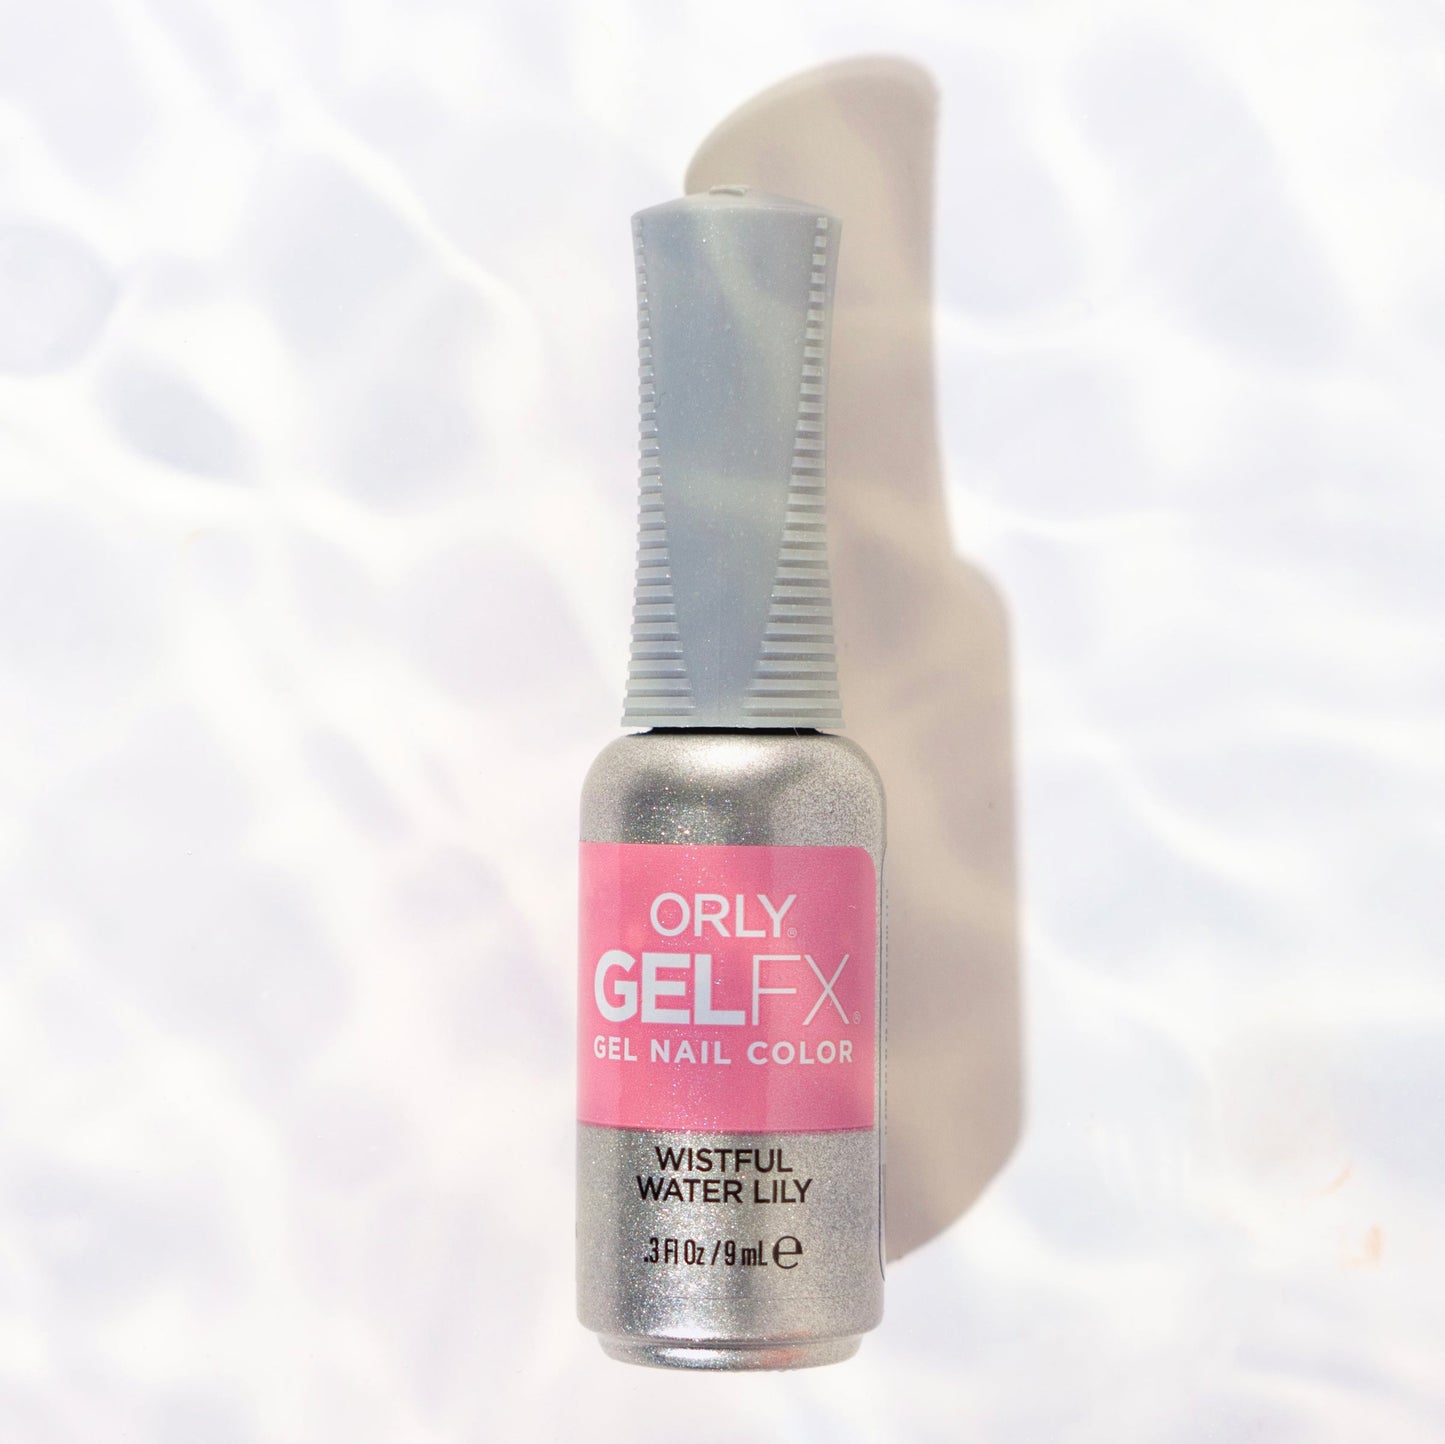 Orly Gel FX - Wistful Water Lily - Universal Nail Supplies